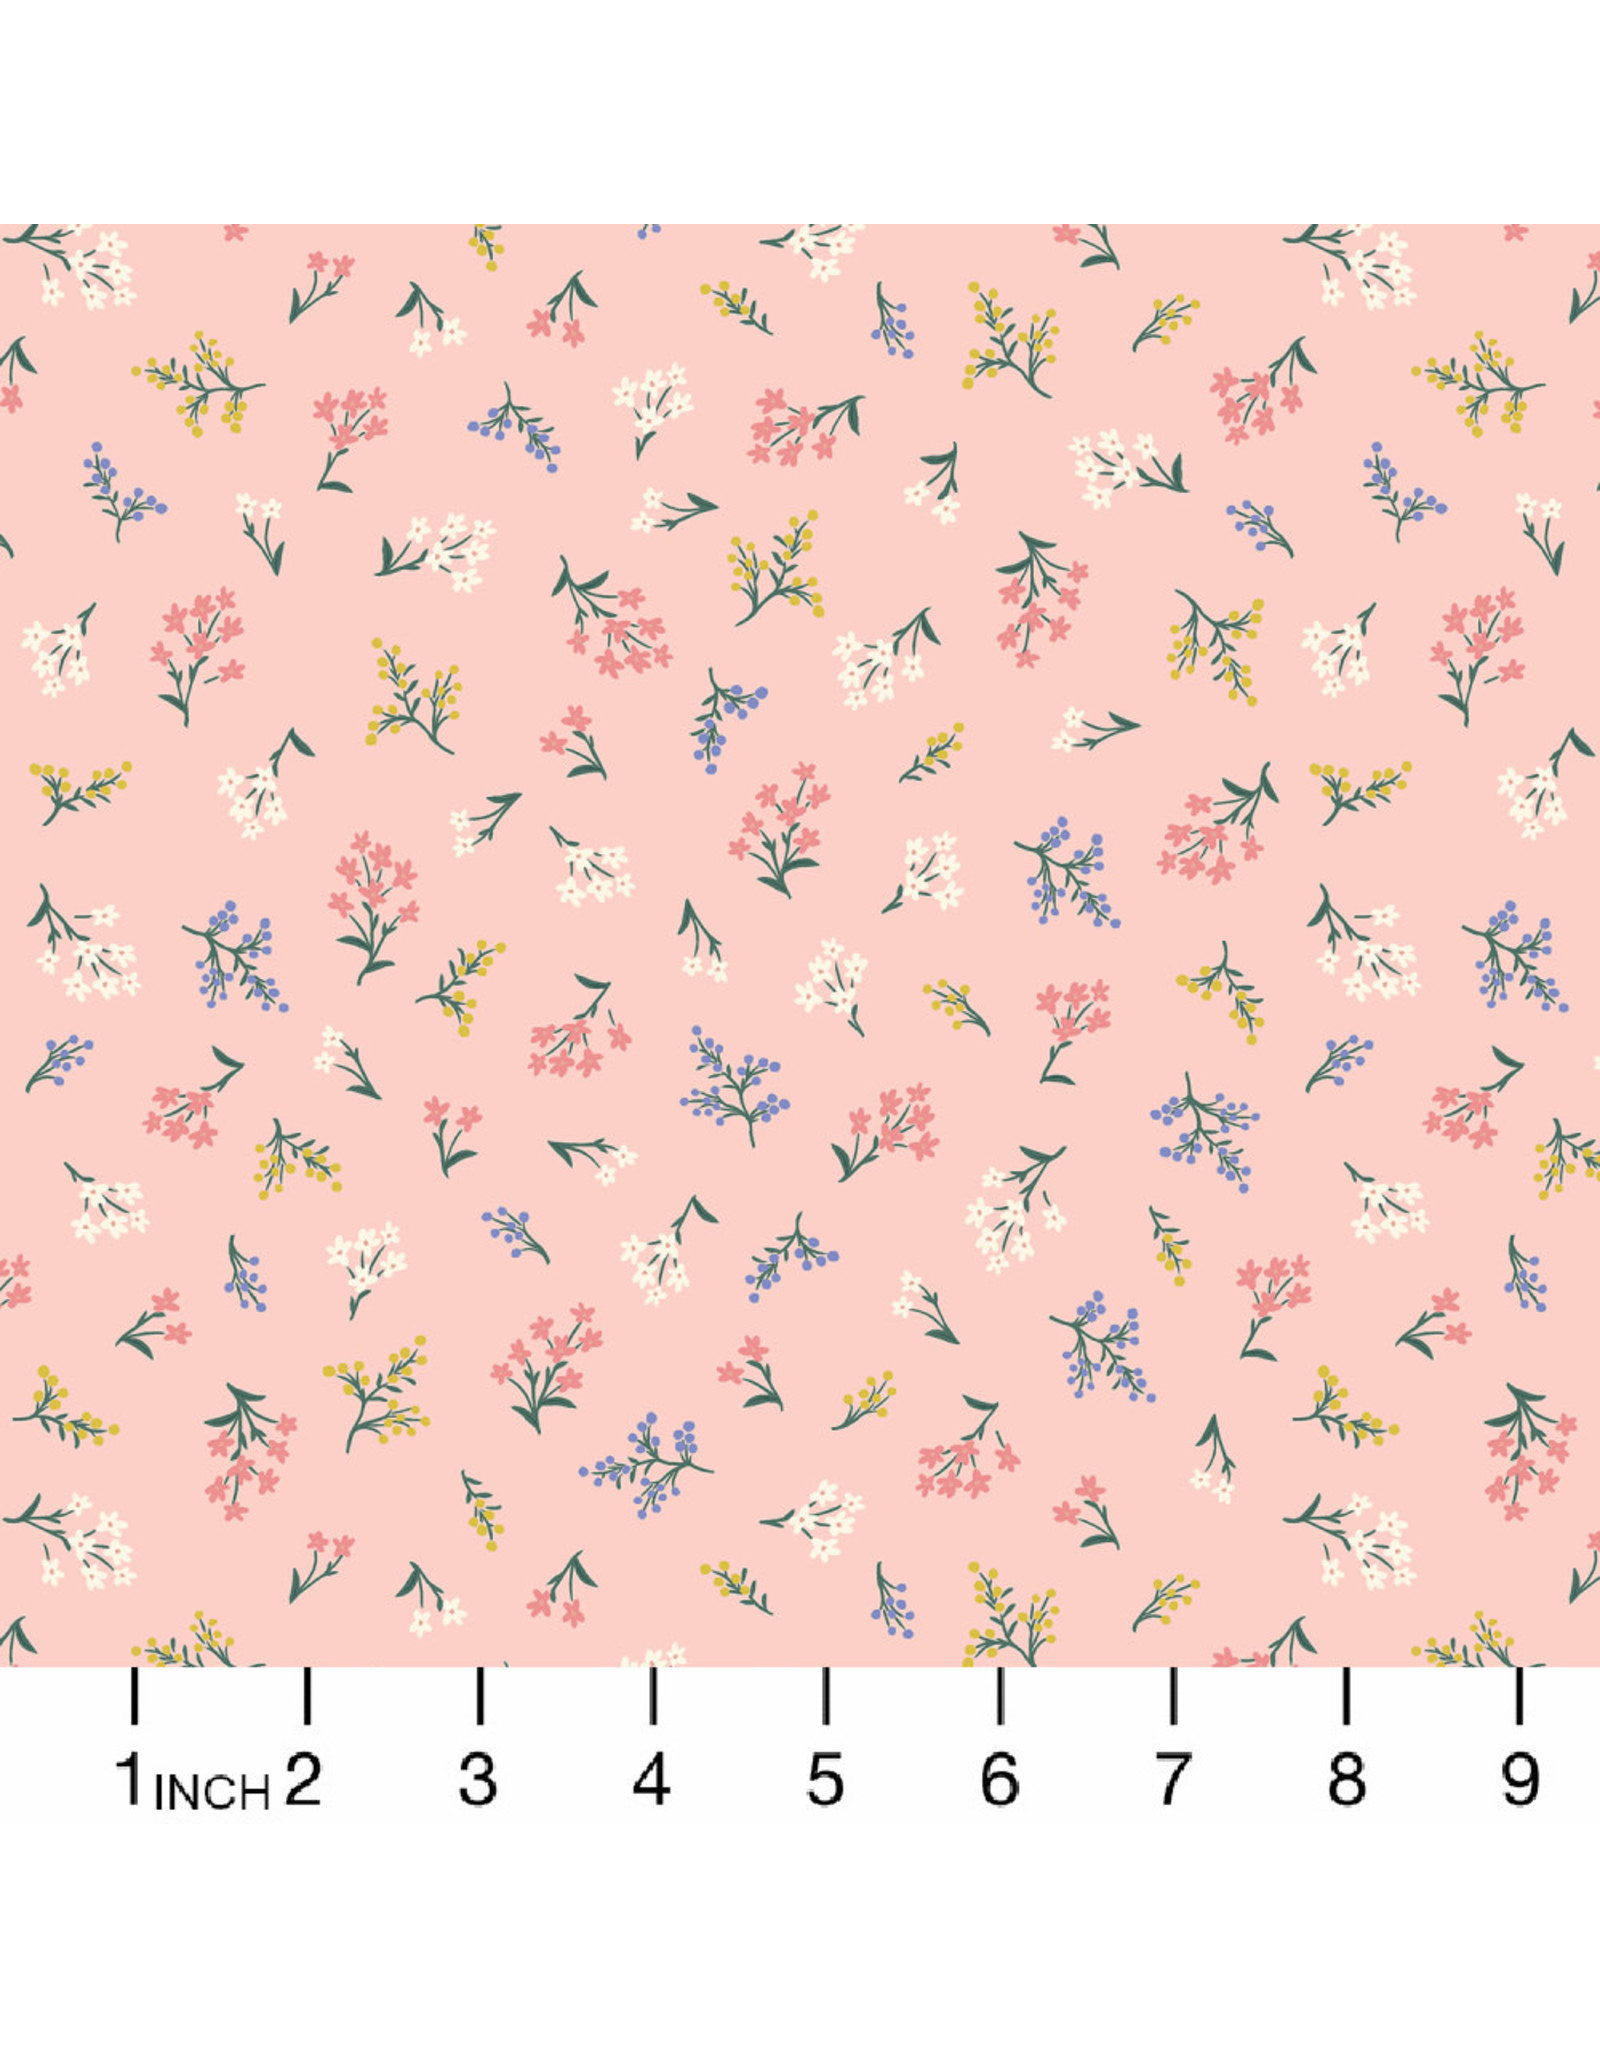 PD's Rifle Paper Co Collection Strawberry Fields, Petites Fleurs in Blush, Dinner Napkin